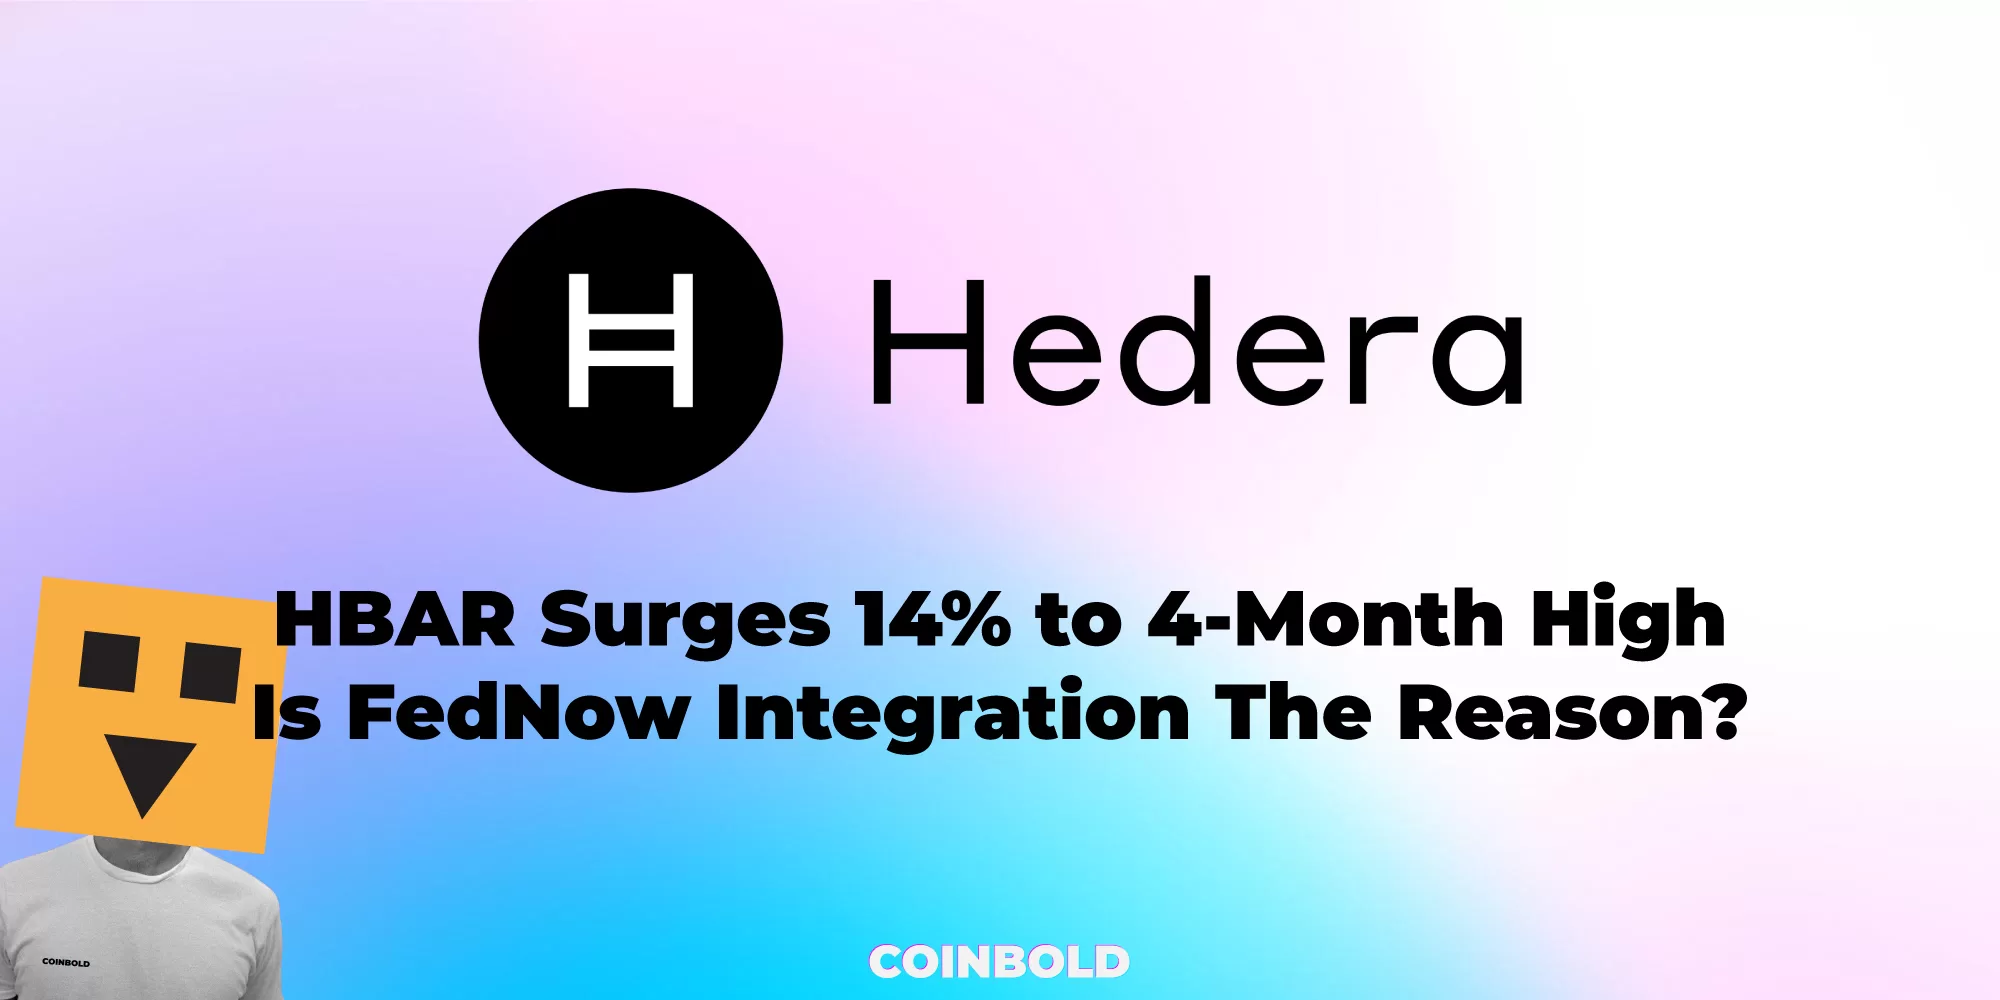 HBAR Surges 14% to 4 Month High Is FedNow Integration the reason?